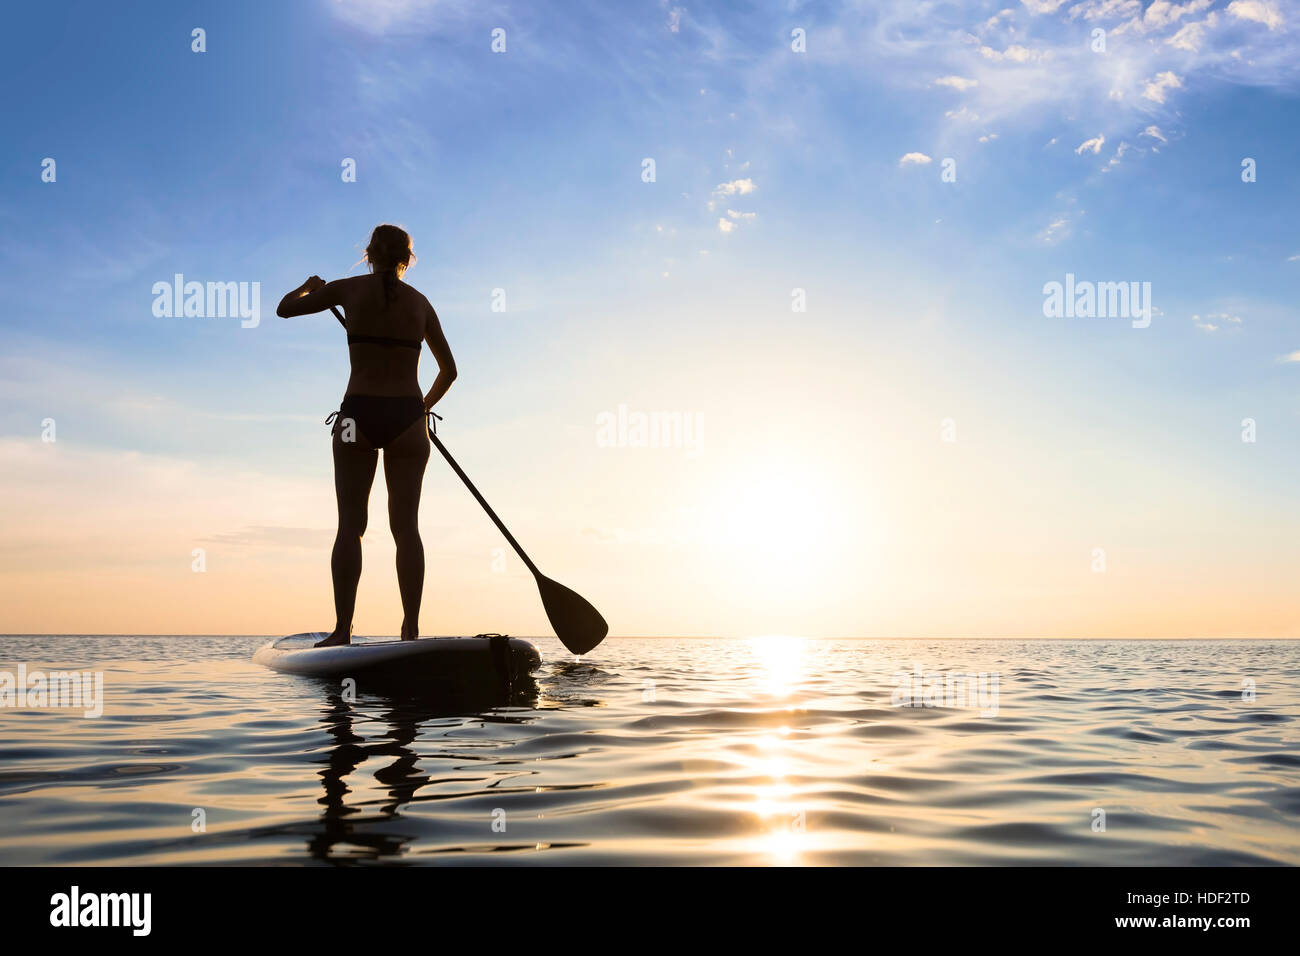 Girl stand up paddle boarding (sup) on quiet sea at sunset Stock Photo